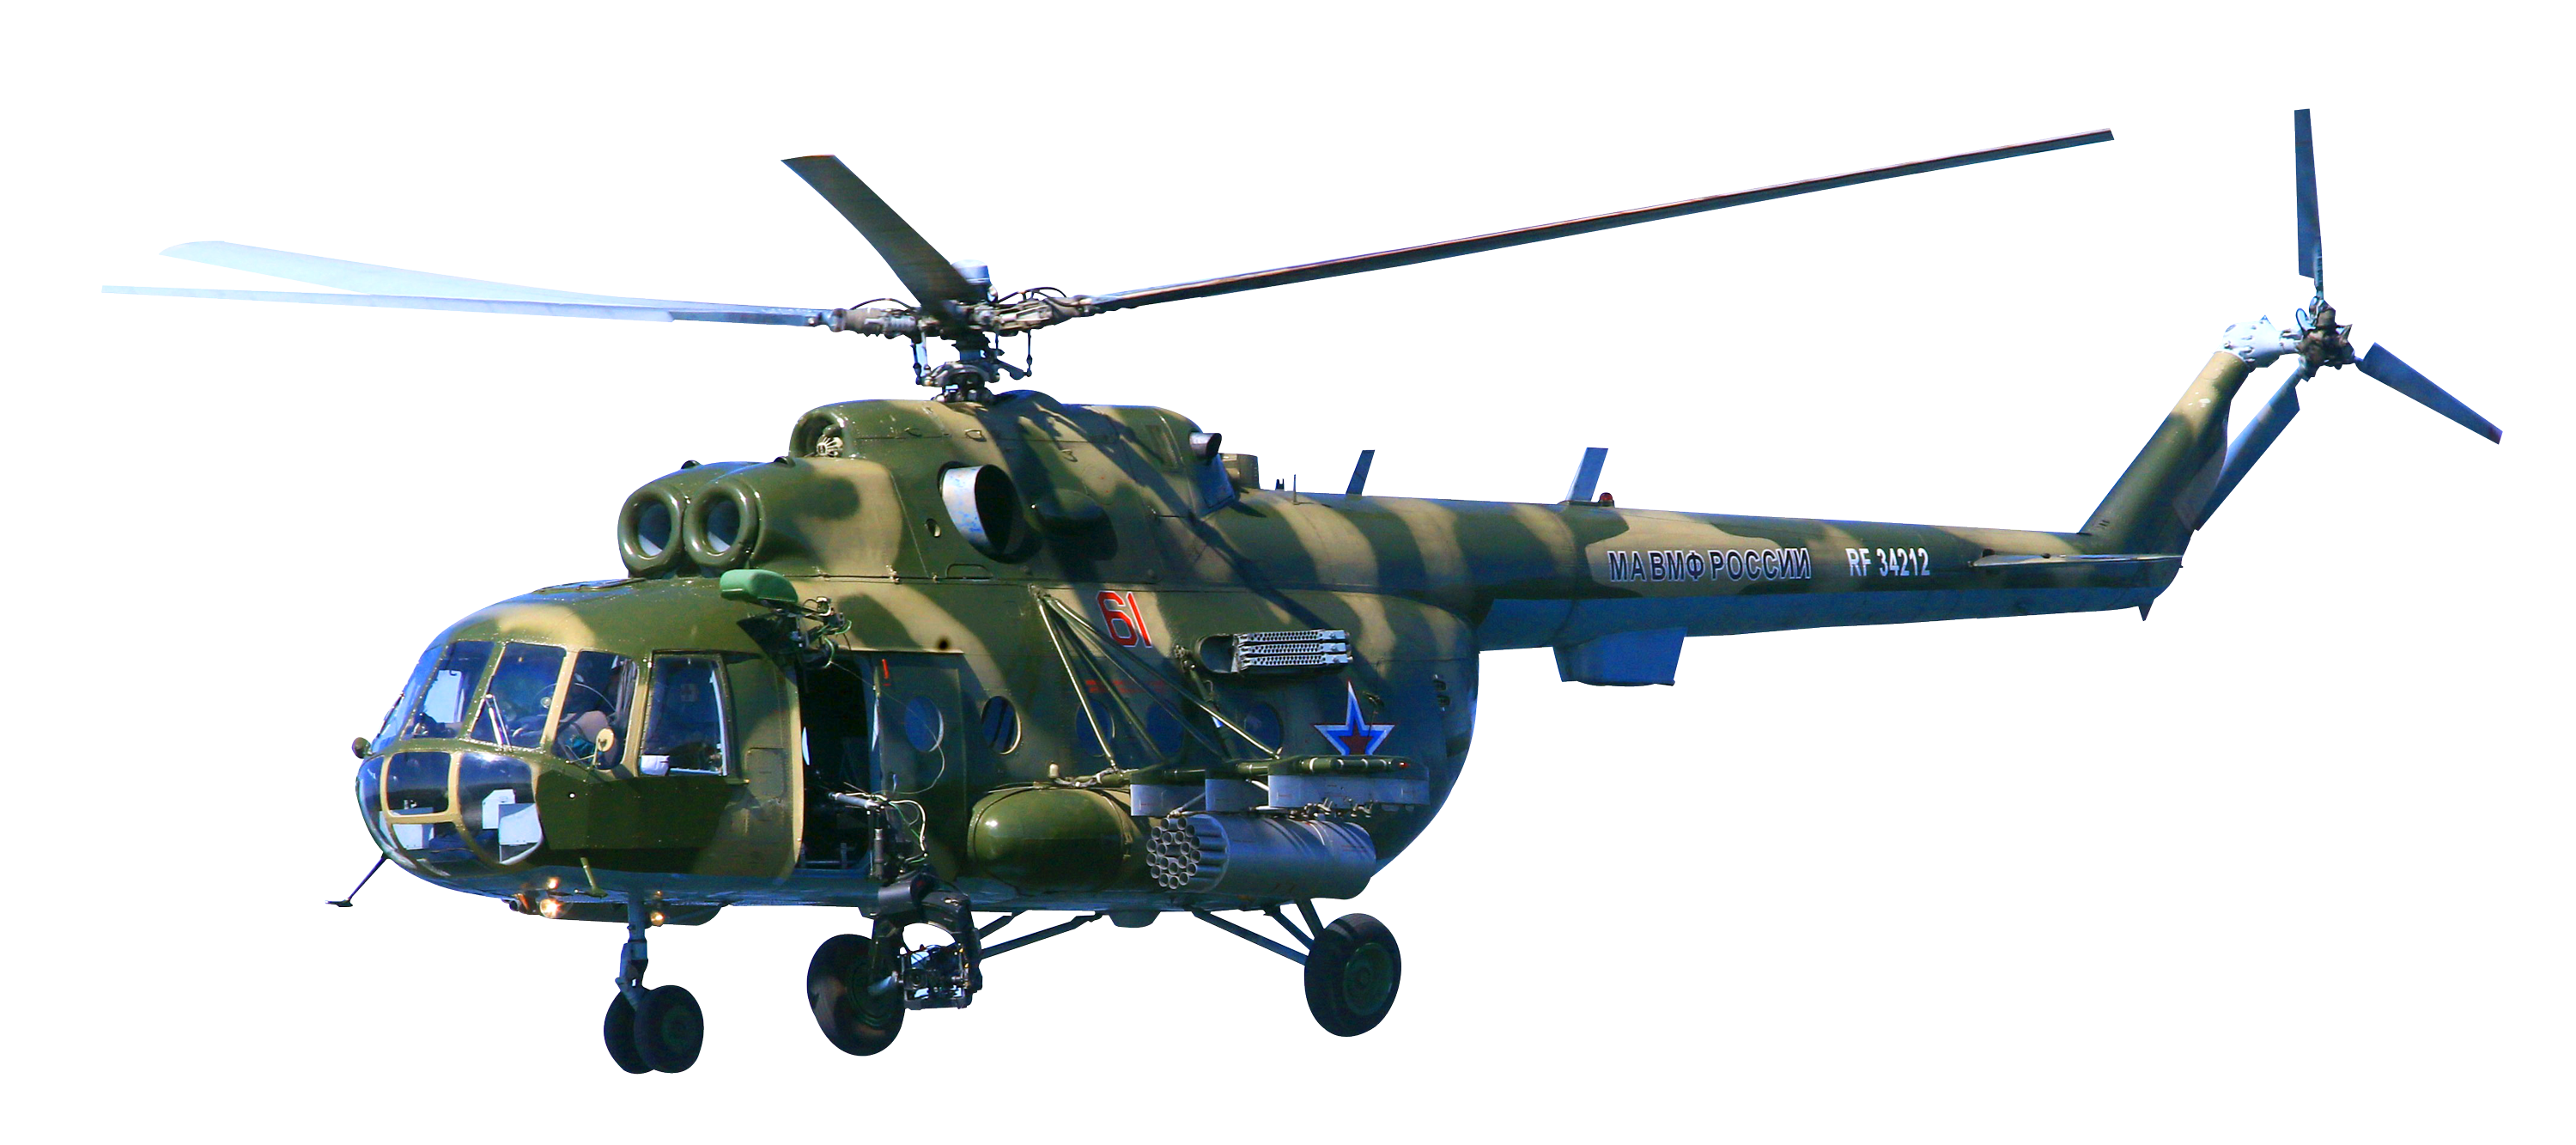 A Green Helicopter With A Black Background